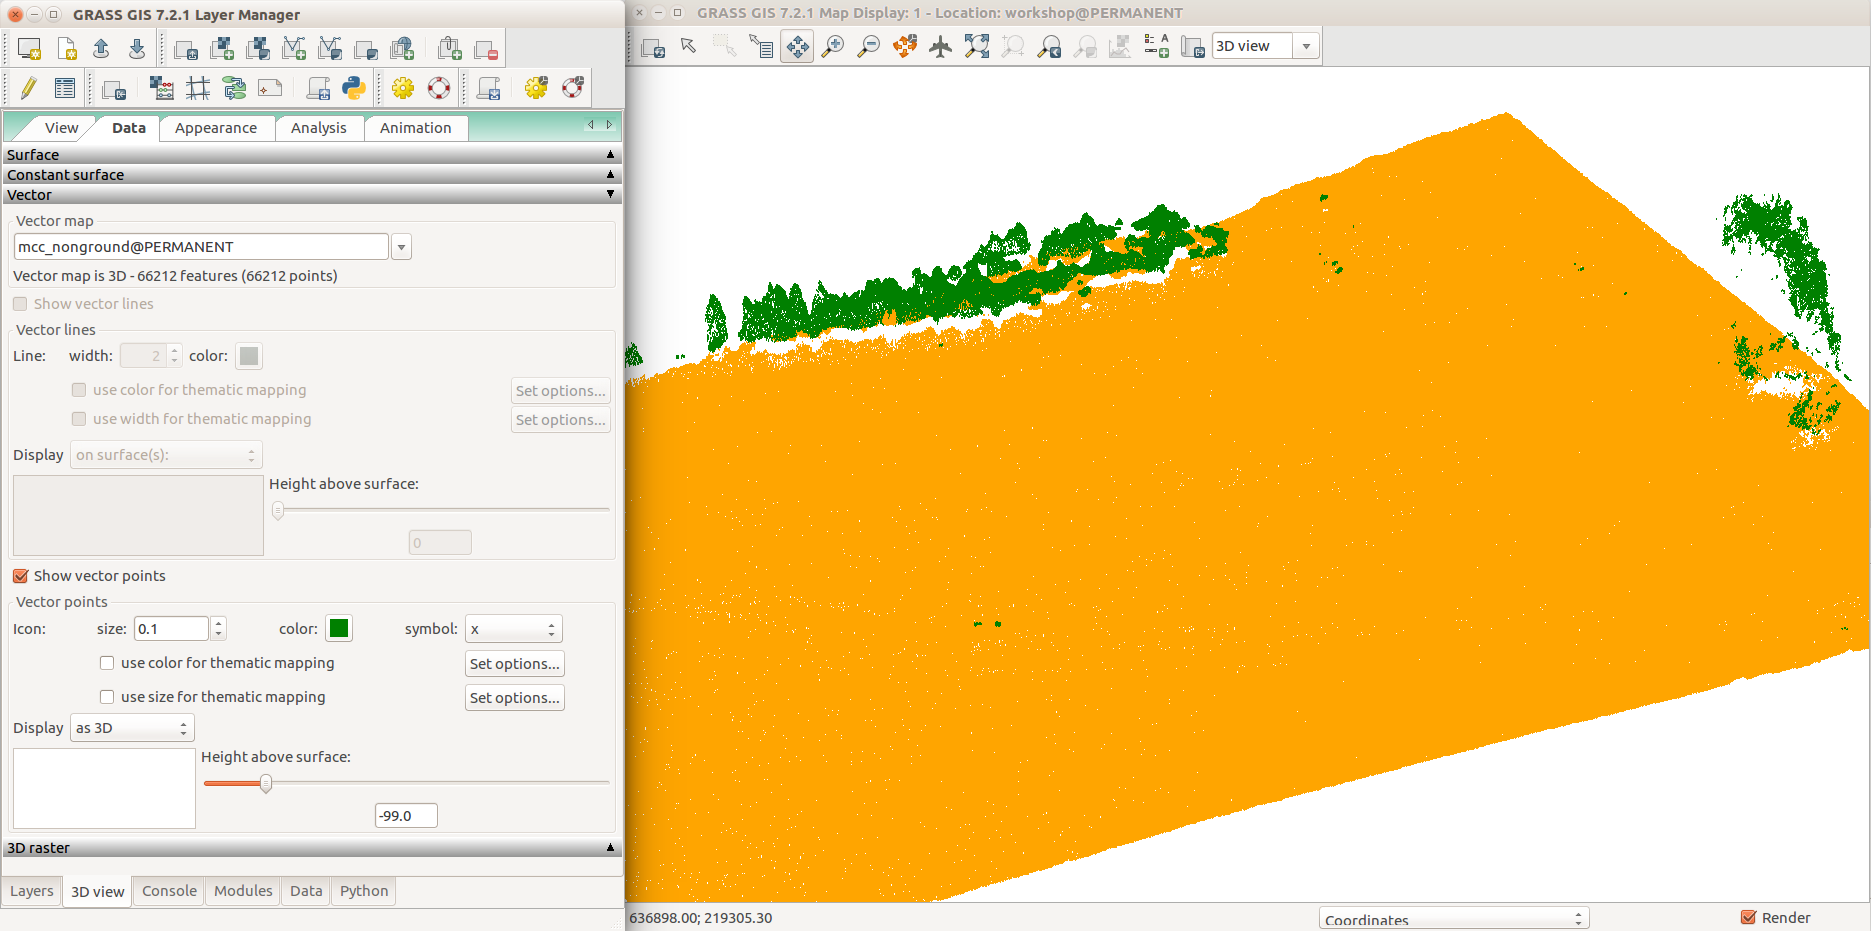 File:WxGUI nviz with point cloud ground and non-ground data tab.png